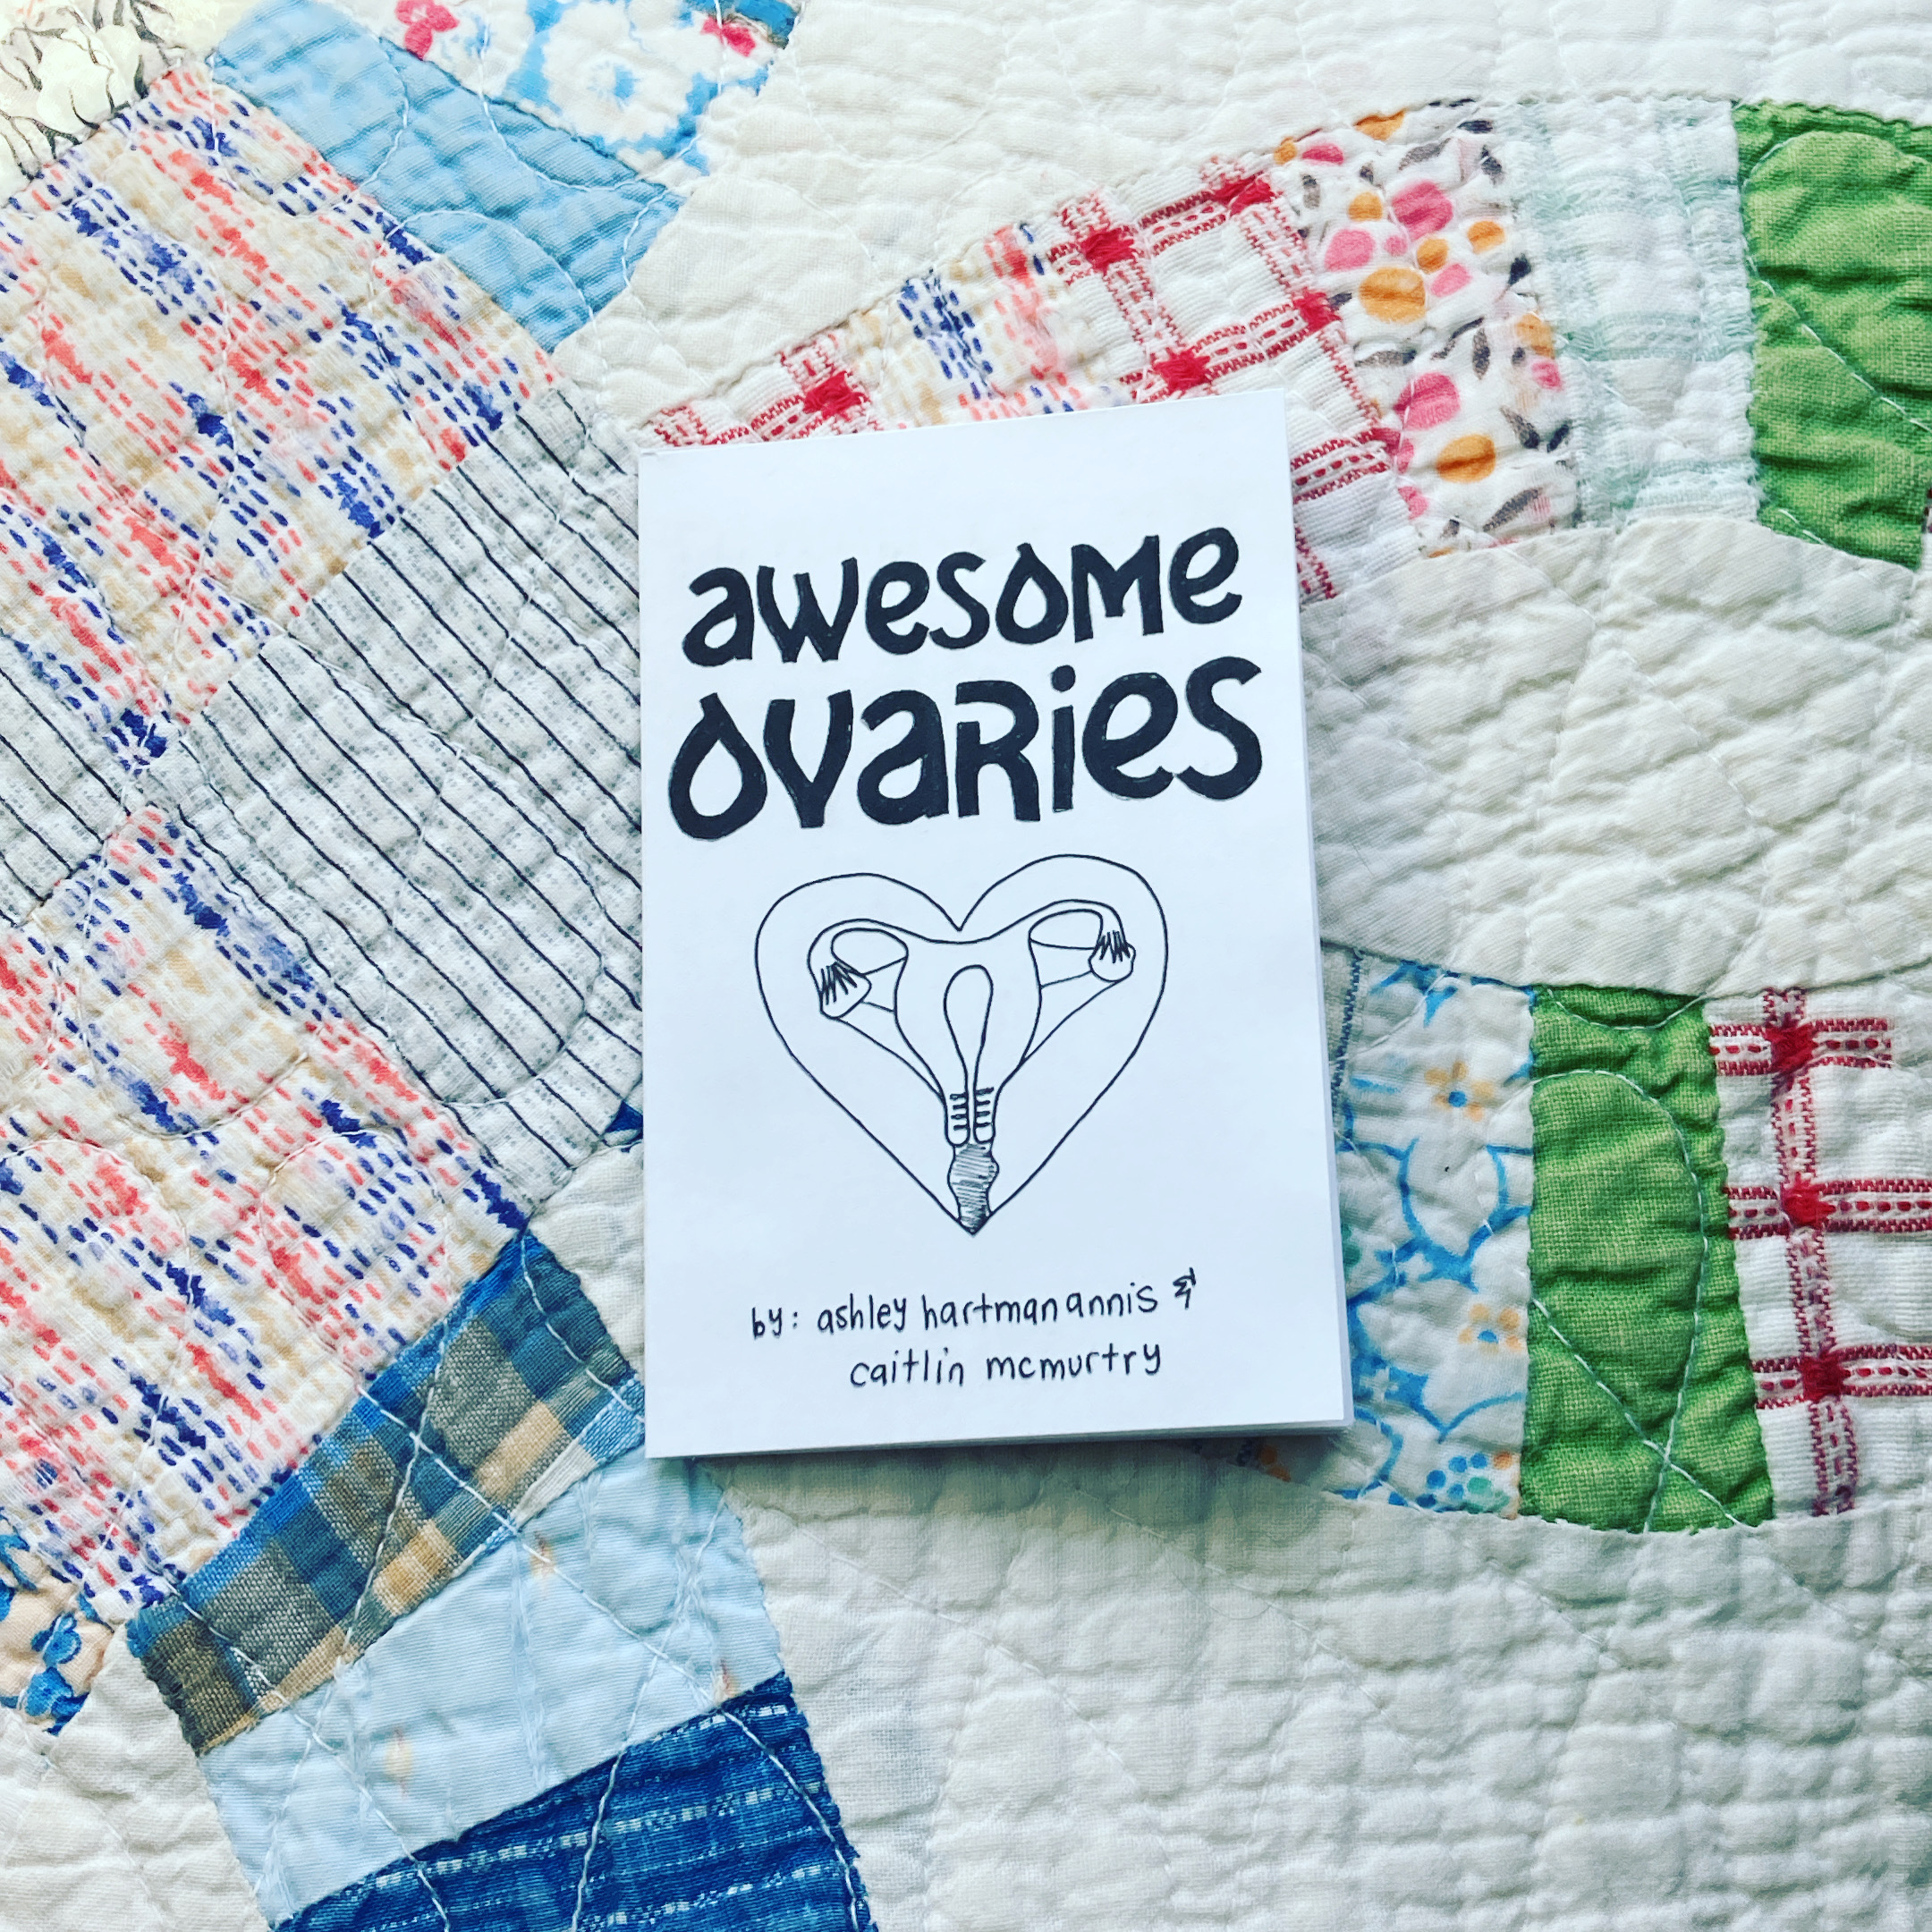 Awesome Ovaries zine created by artist Ashley hartman annis